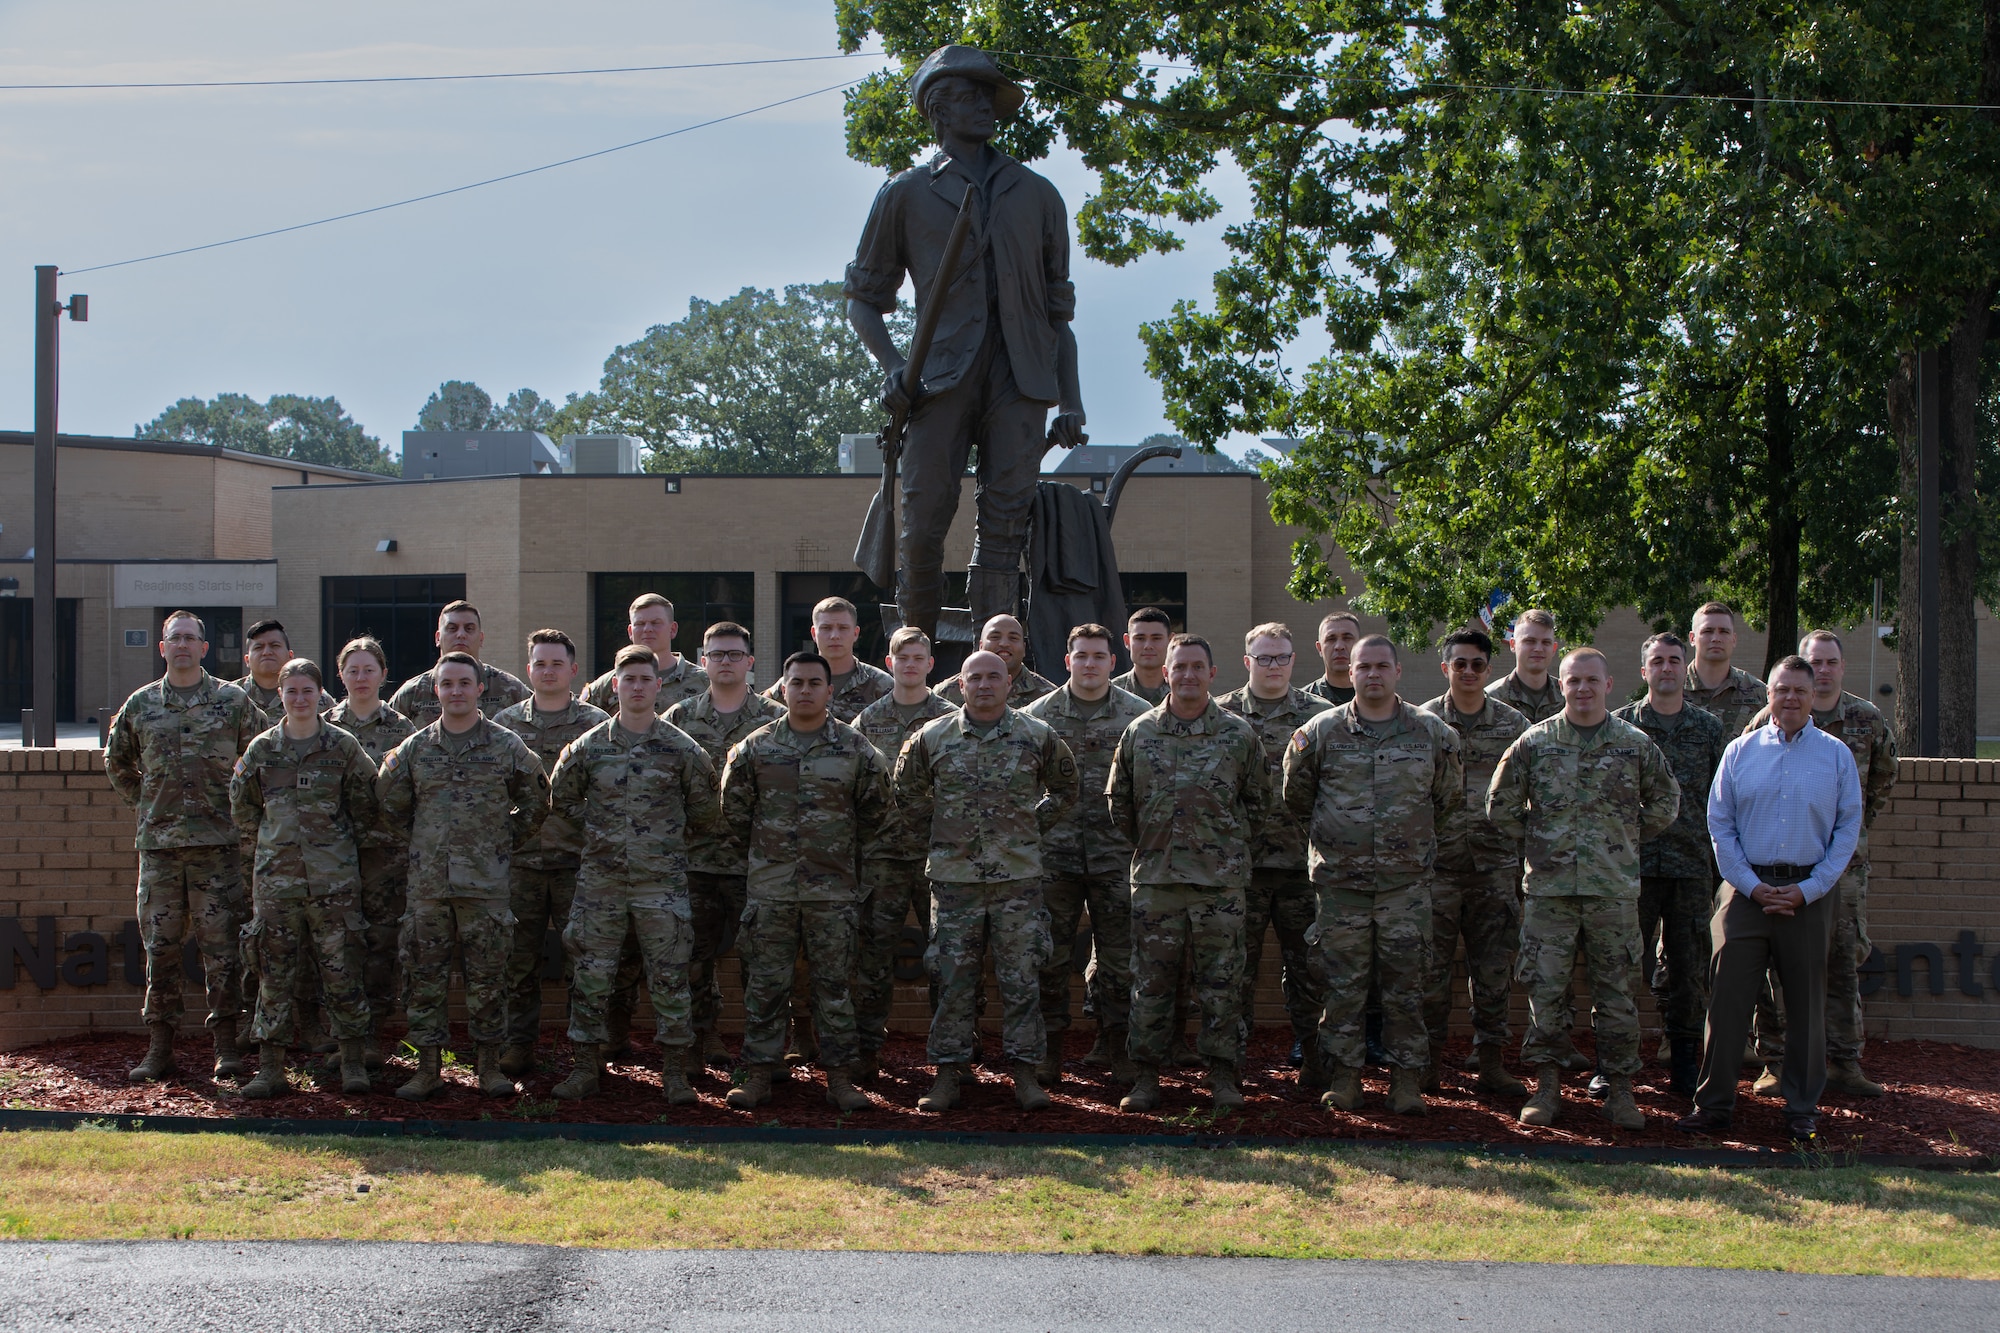 Iowa National Guardsmen participating in Cyber Shield pose with one of their civilian counterparts and one Kosovo soldier from their State Partnership Program in front of the Minuteman statue at The Professional Educational Center, Little Rock, Ark., June 8, 2023. Approximately 800 National Guard and Army Reserve Soldiers, Airmen, Sailors, and civilian cyber professionals from around the world gathered during this year’s Cyber Shield training exercise.